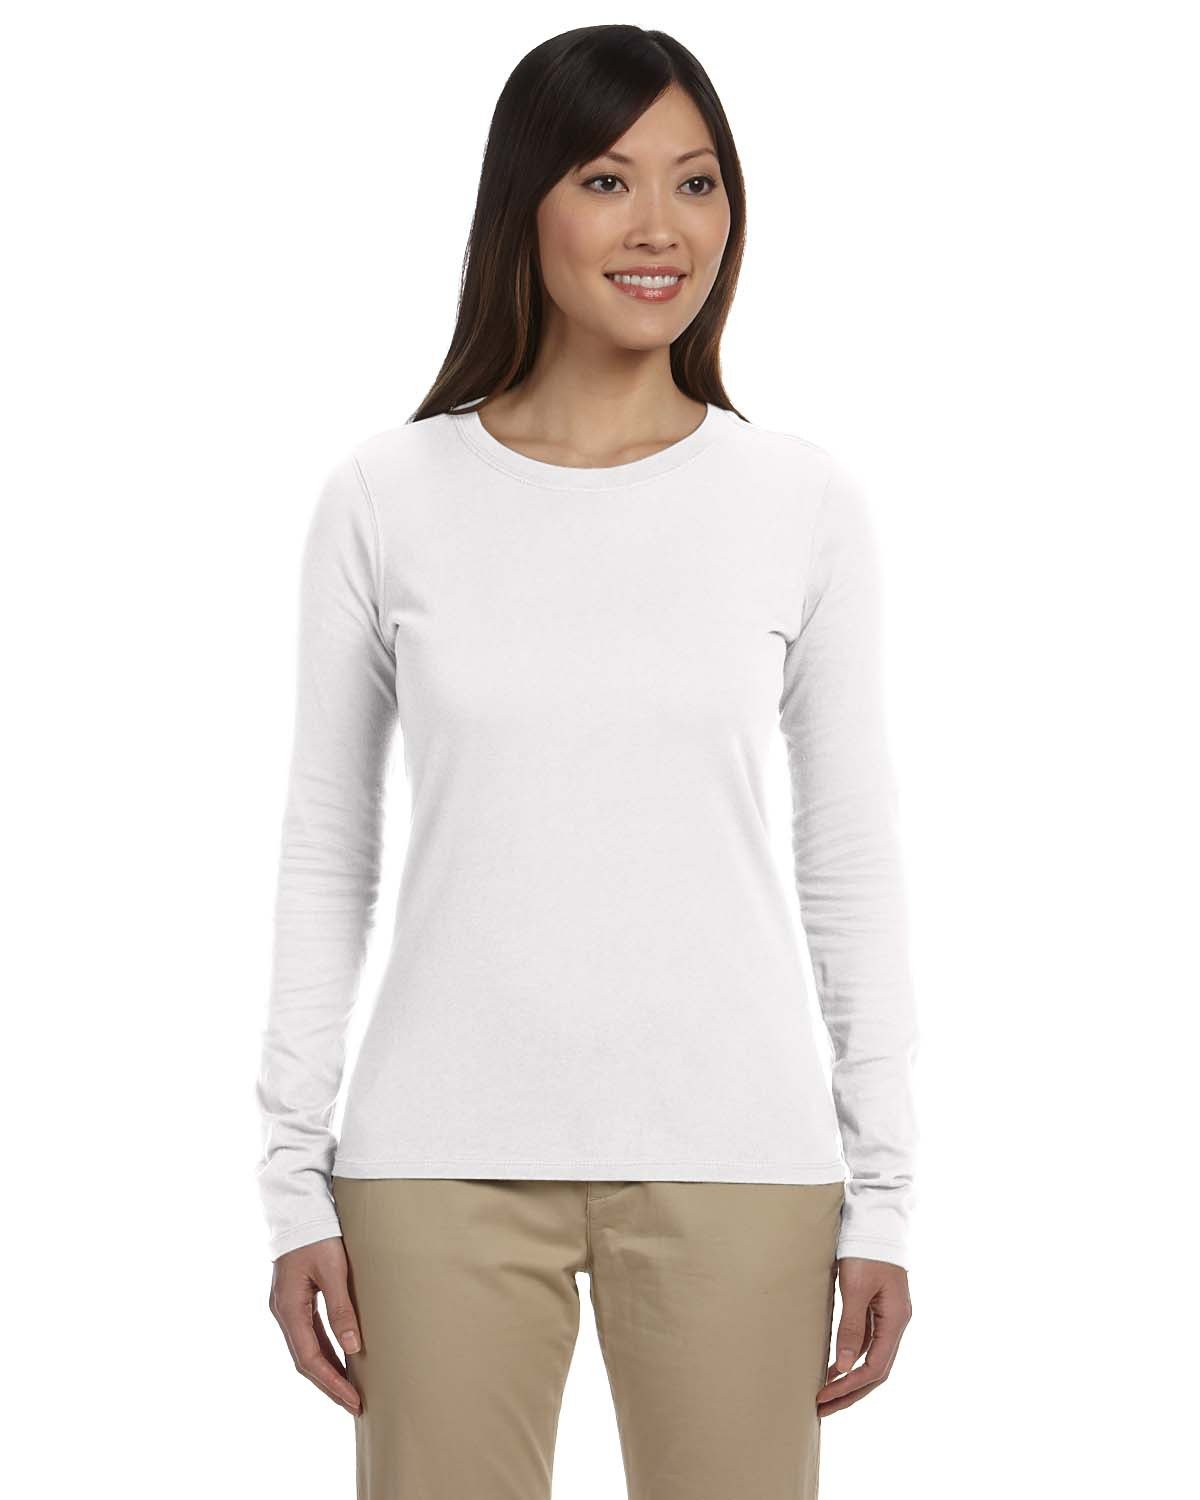 econscious Ladies' Classic Long-Sleeve T-Shirt | US Generic Non-Priced